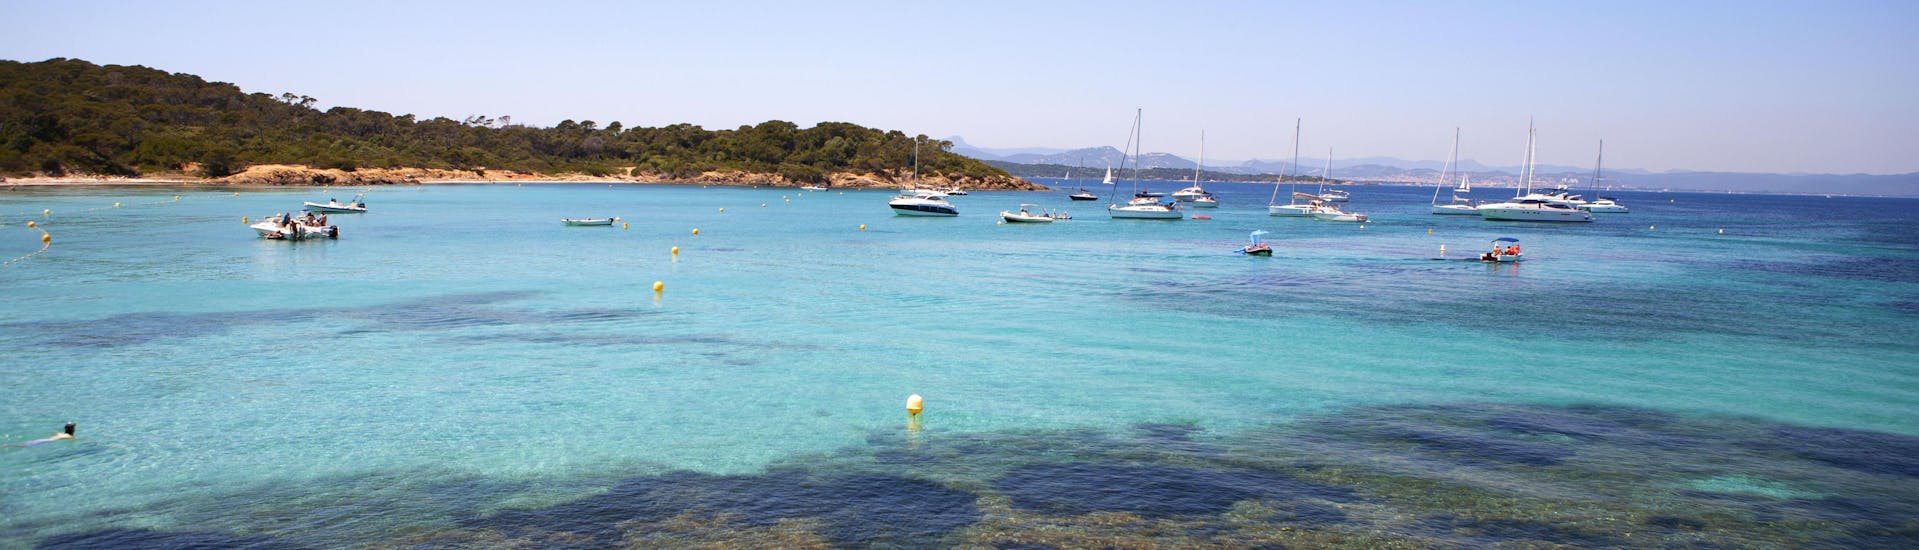 The wonderful coast of Bandol, a popular destination for boat trips in the French Riviera.